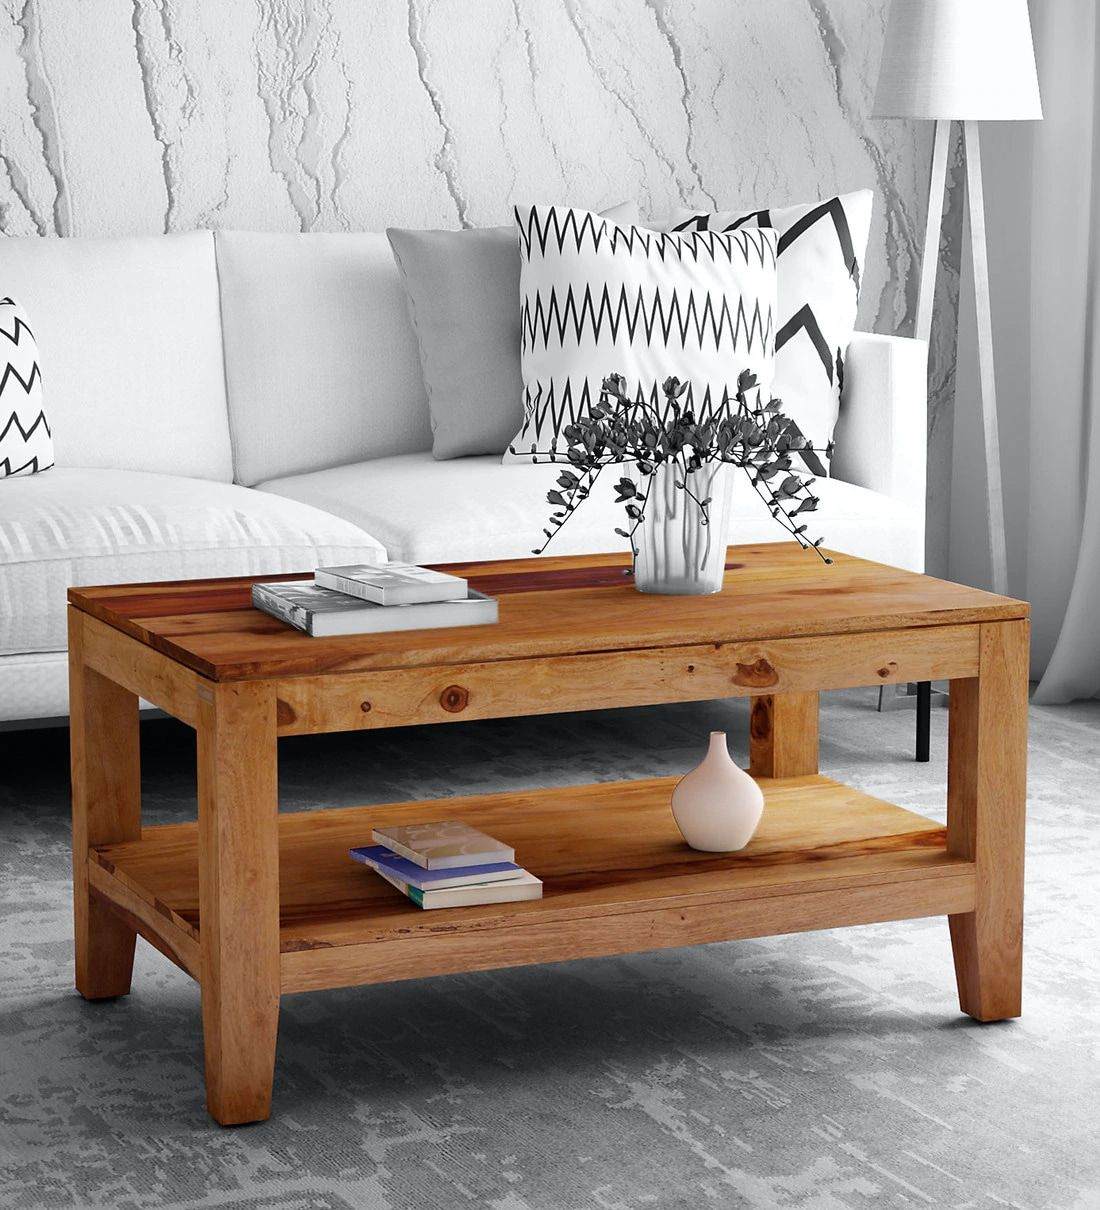 Buy Anitz Solid Wood Coffee Table In Warm Walnut Finish Inside Wood Coffee Tables (View 4 of 15)